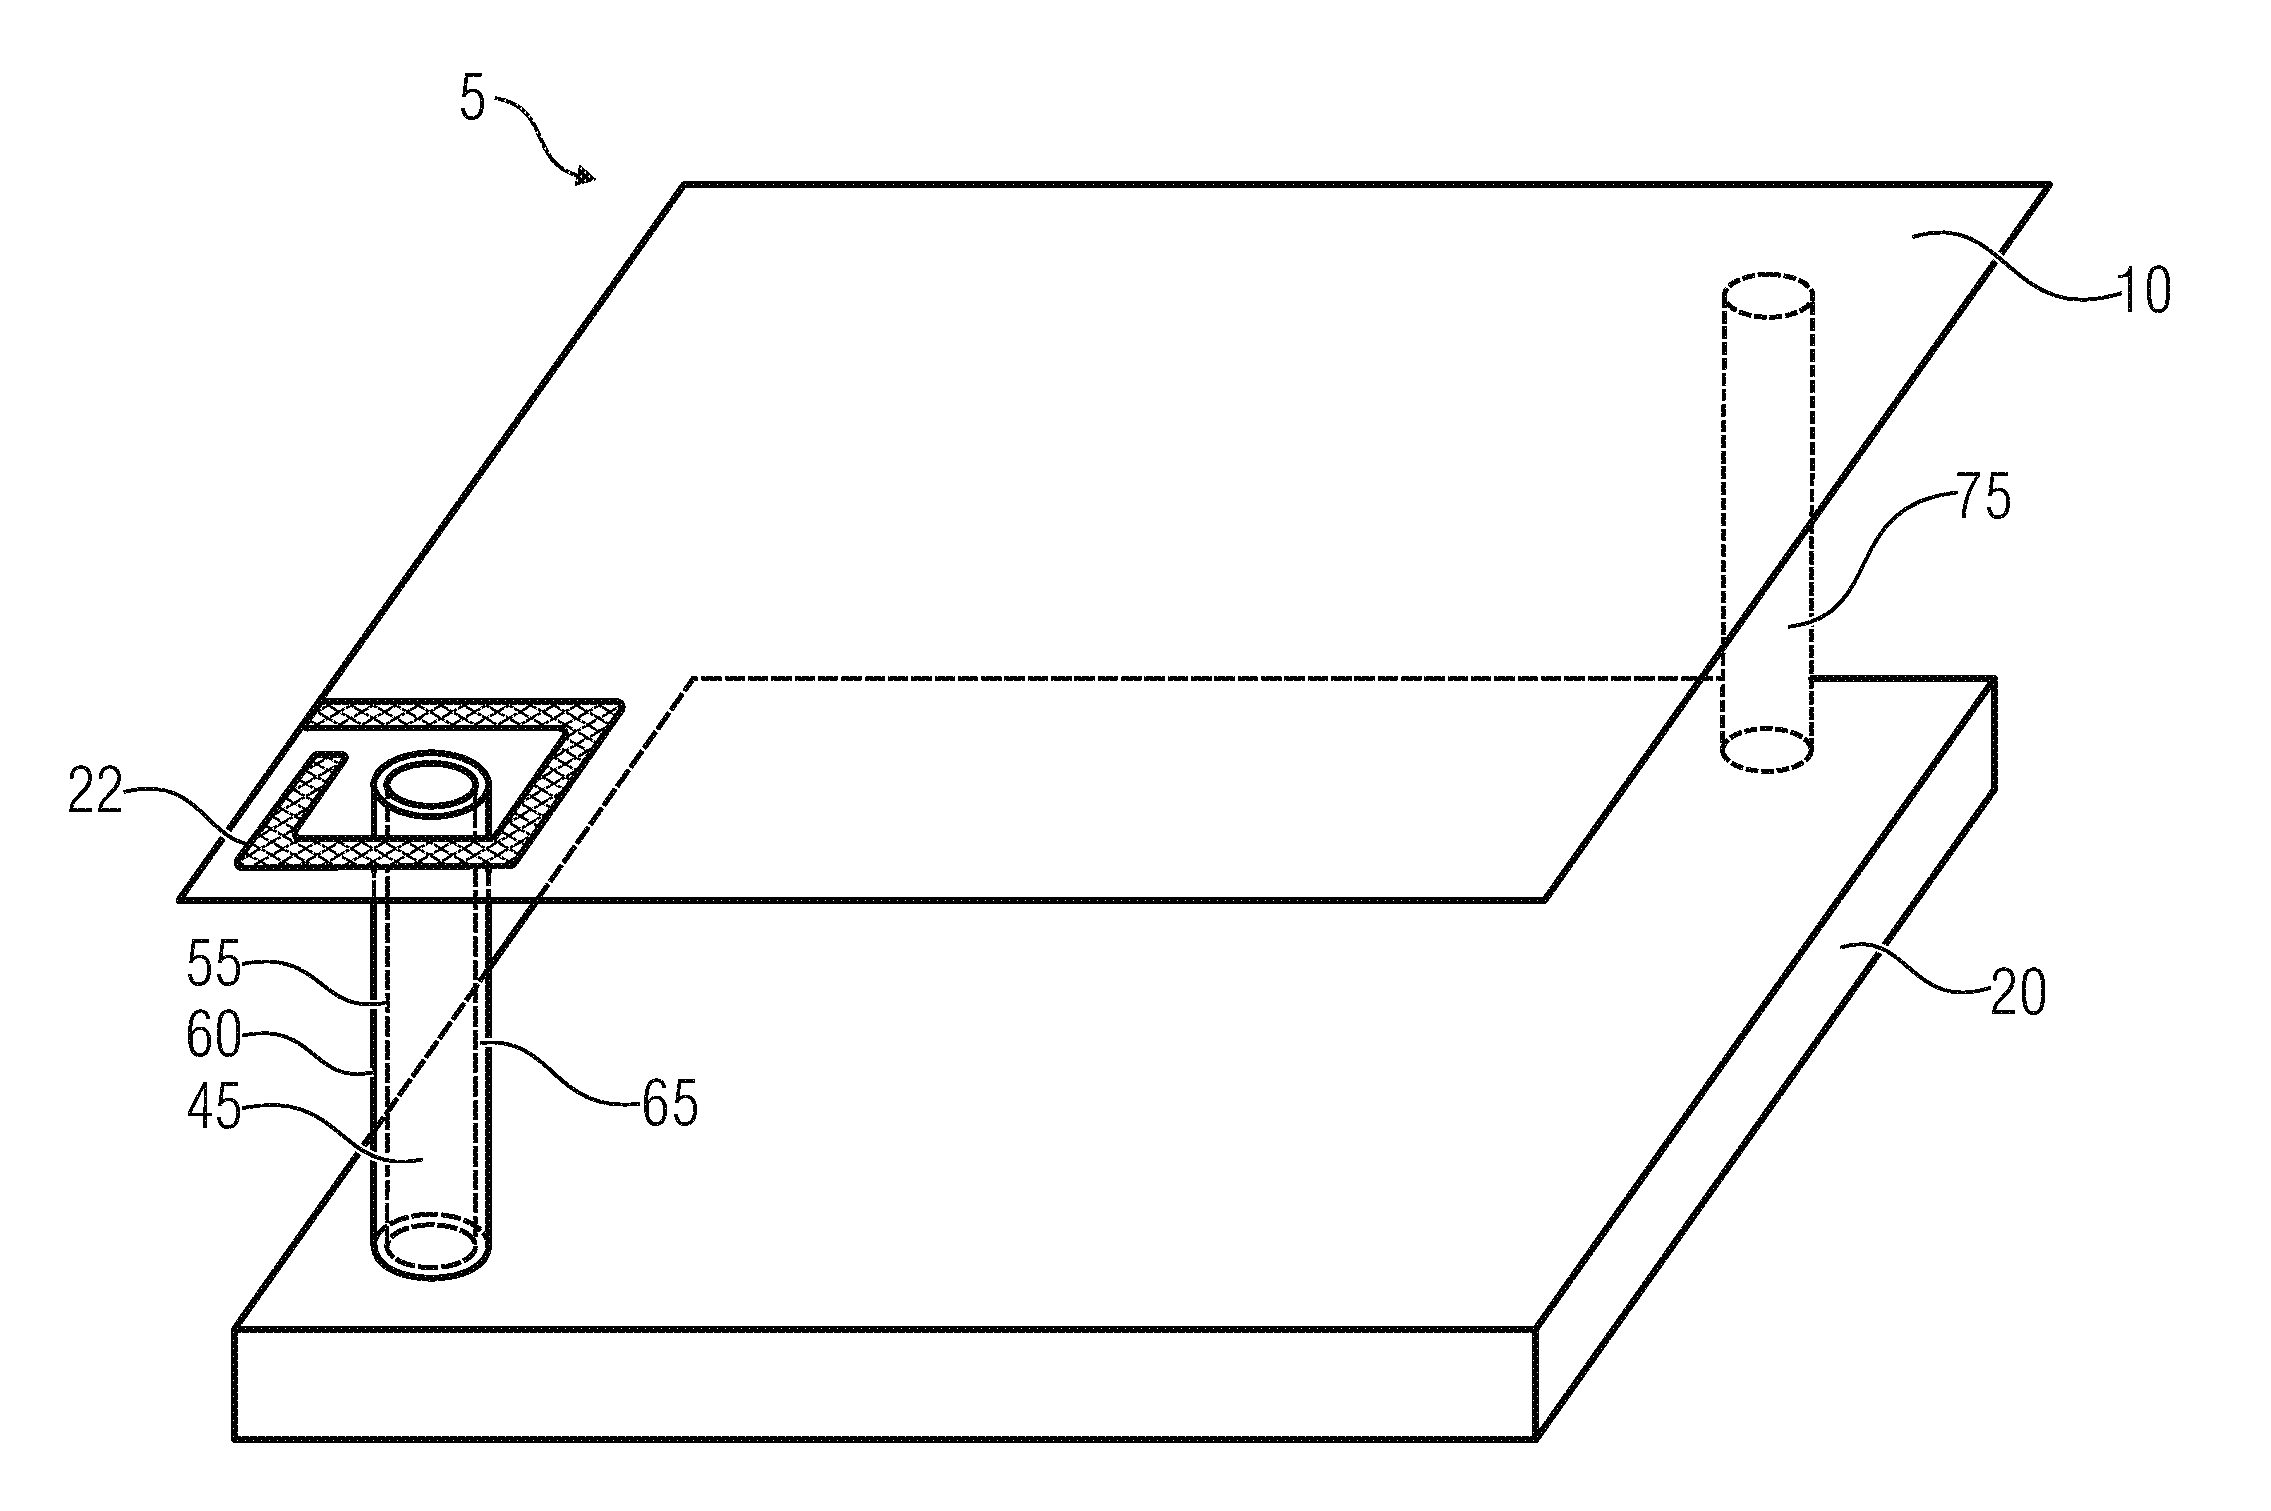 Radiation detector, array of radiation detectors and method for manufacturing a radiation detector